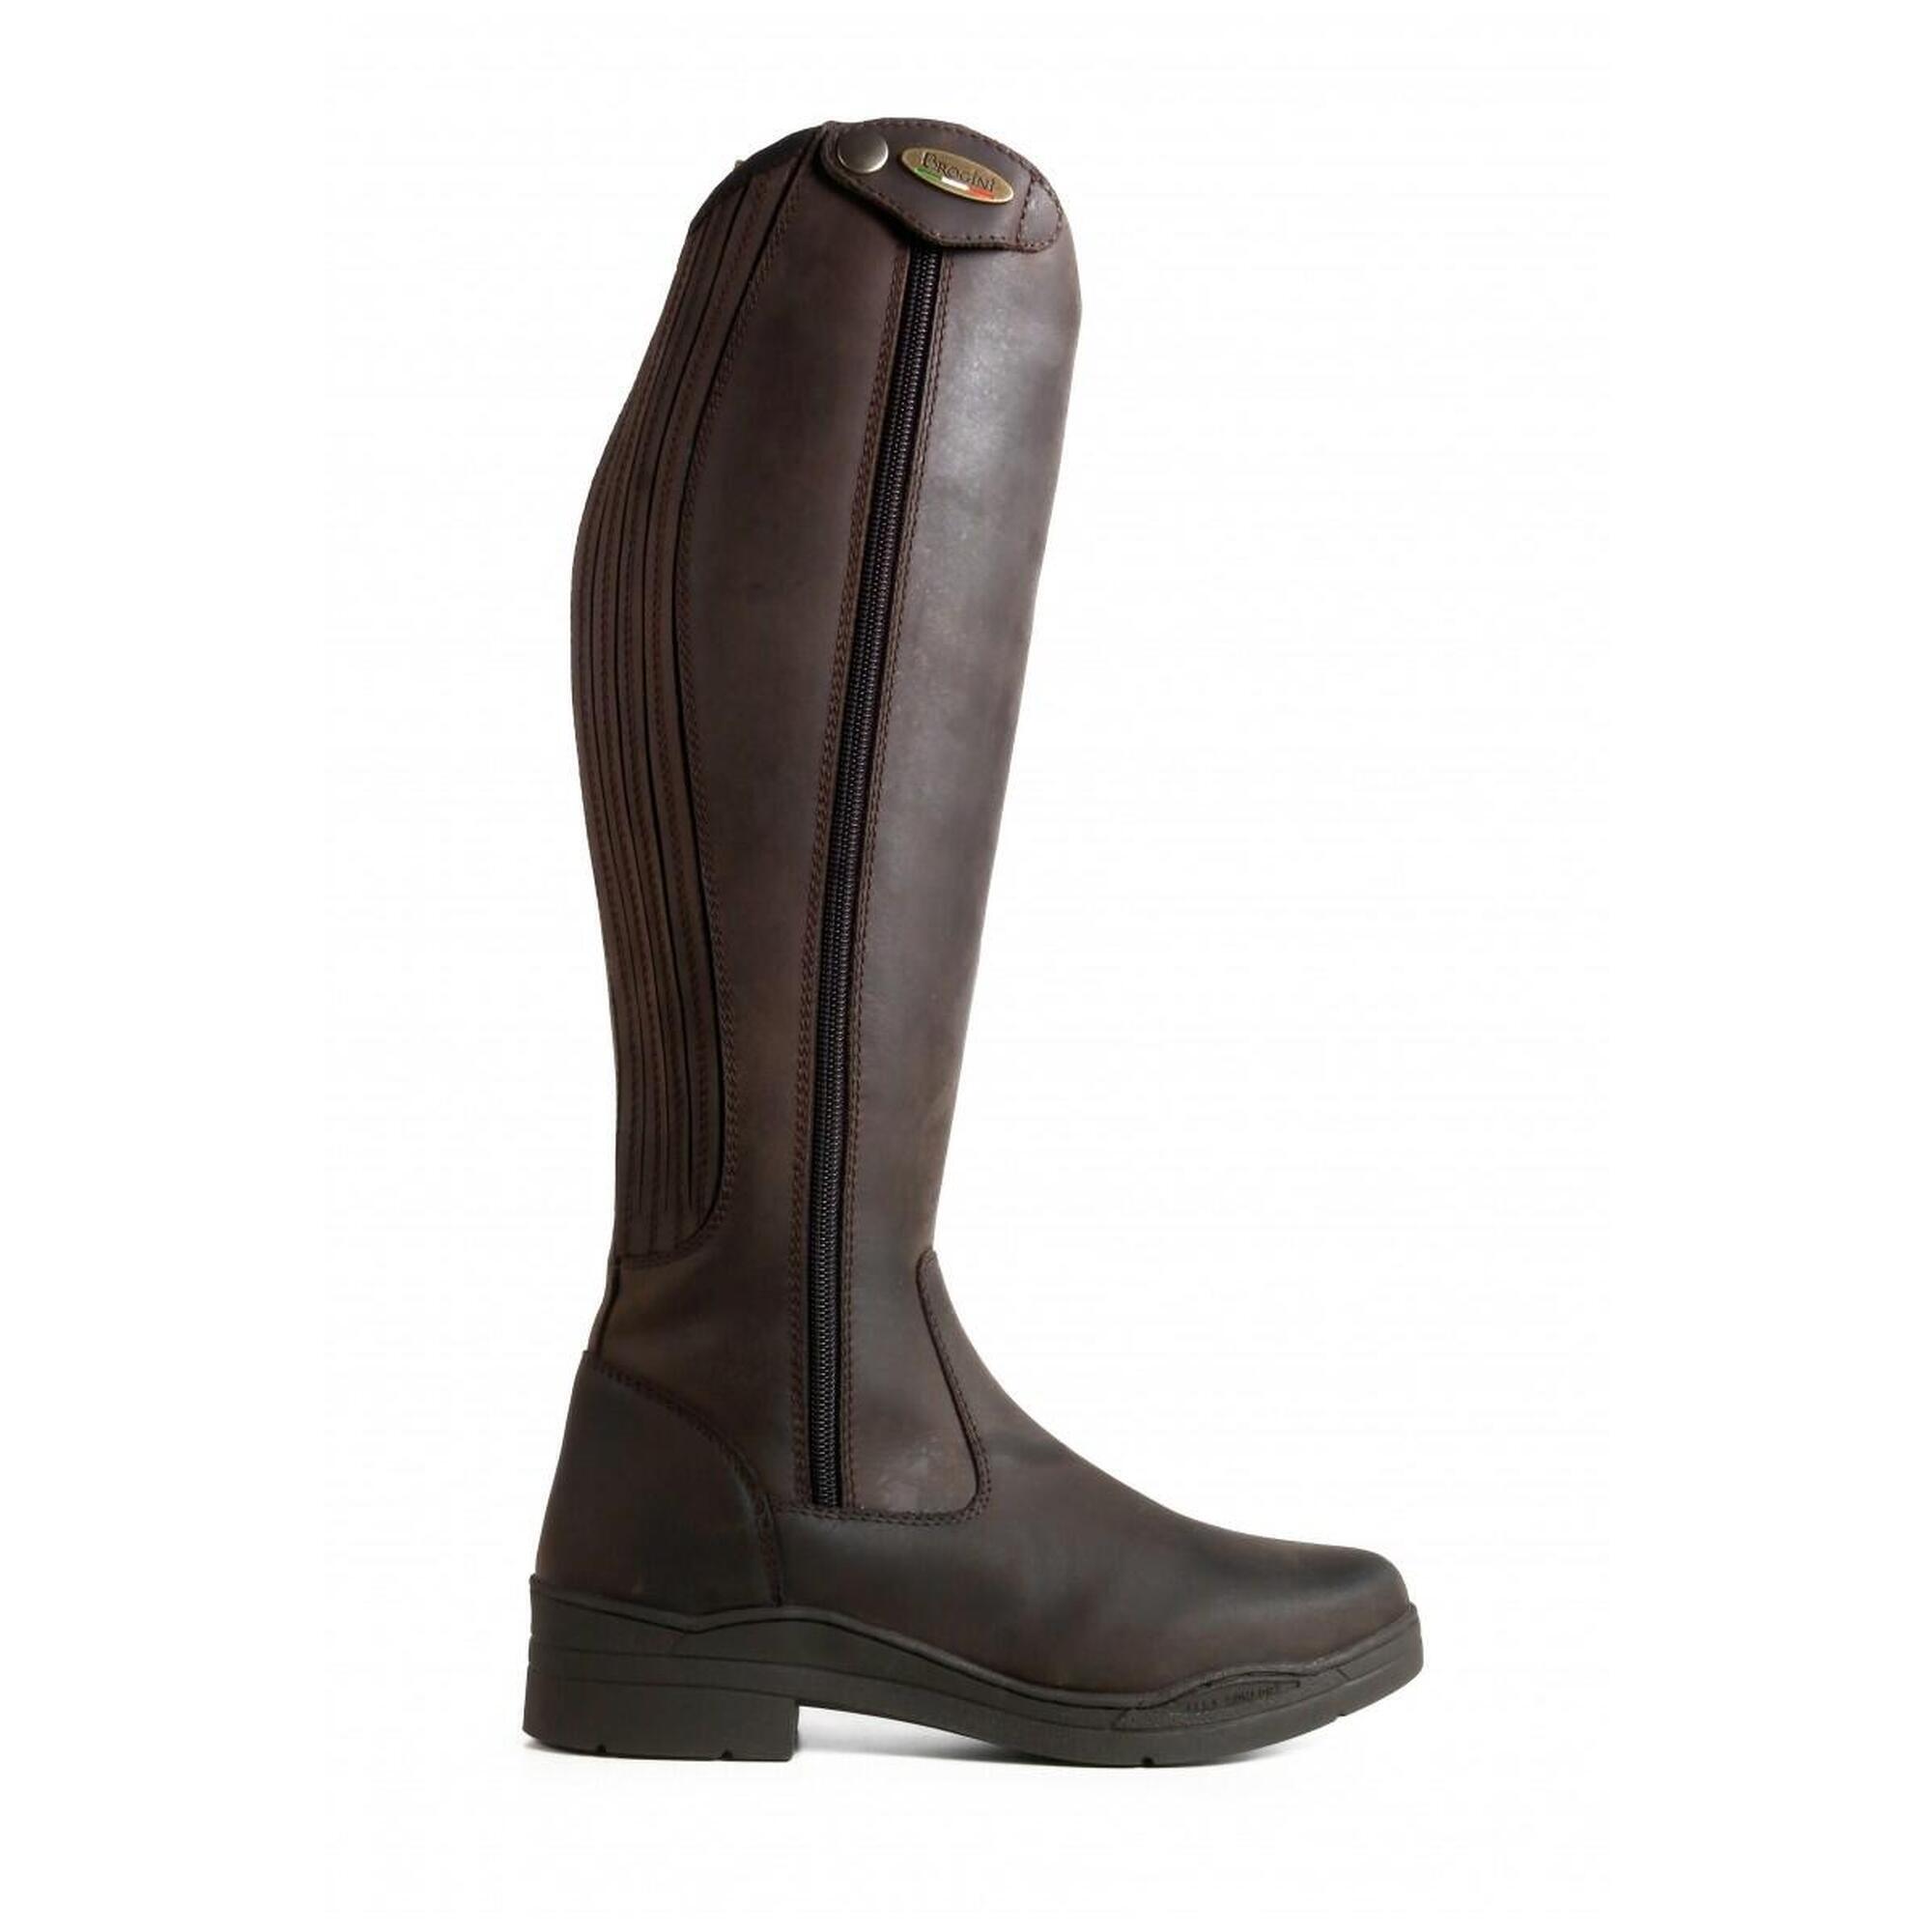 Monte Cervino zipped riding boot- Brown 1/4